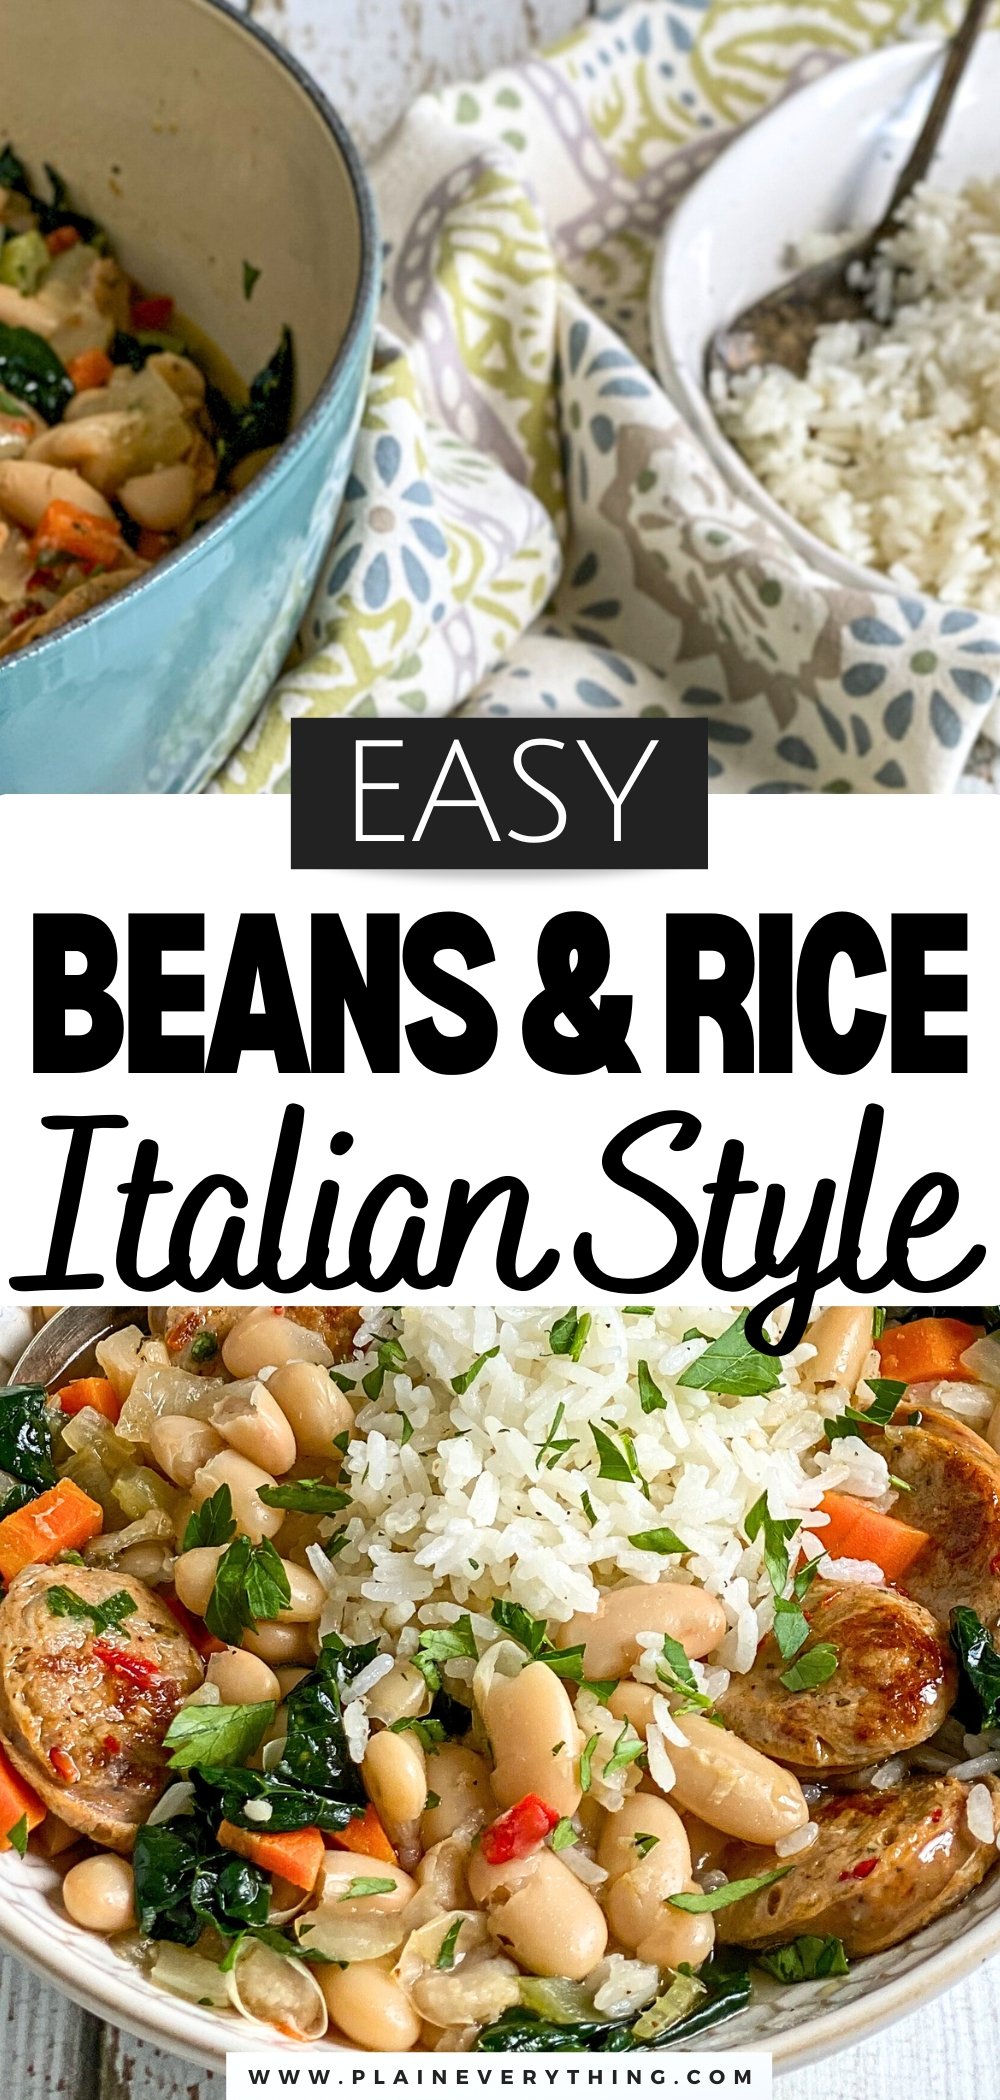 Italian Style Beans and Rice with Sausage